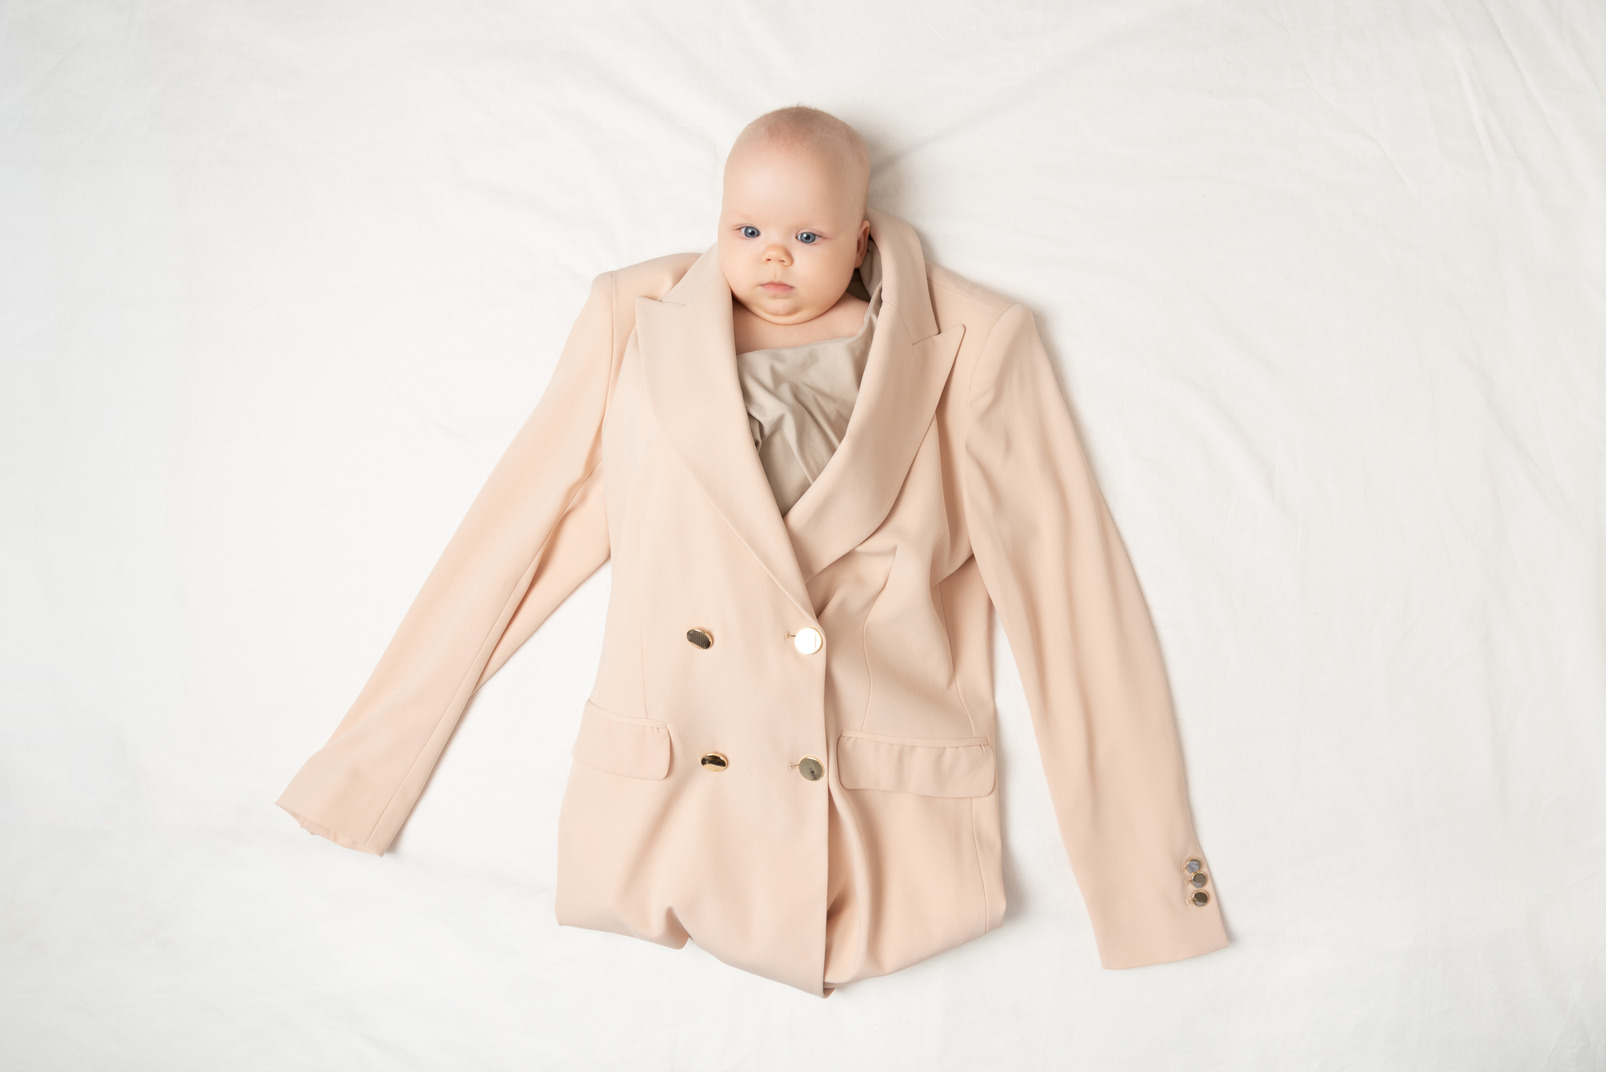 Baby girl in adult's jacket and blouse